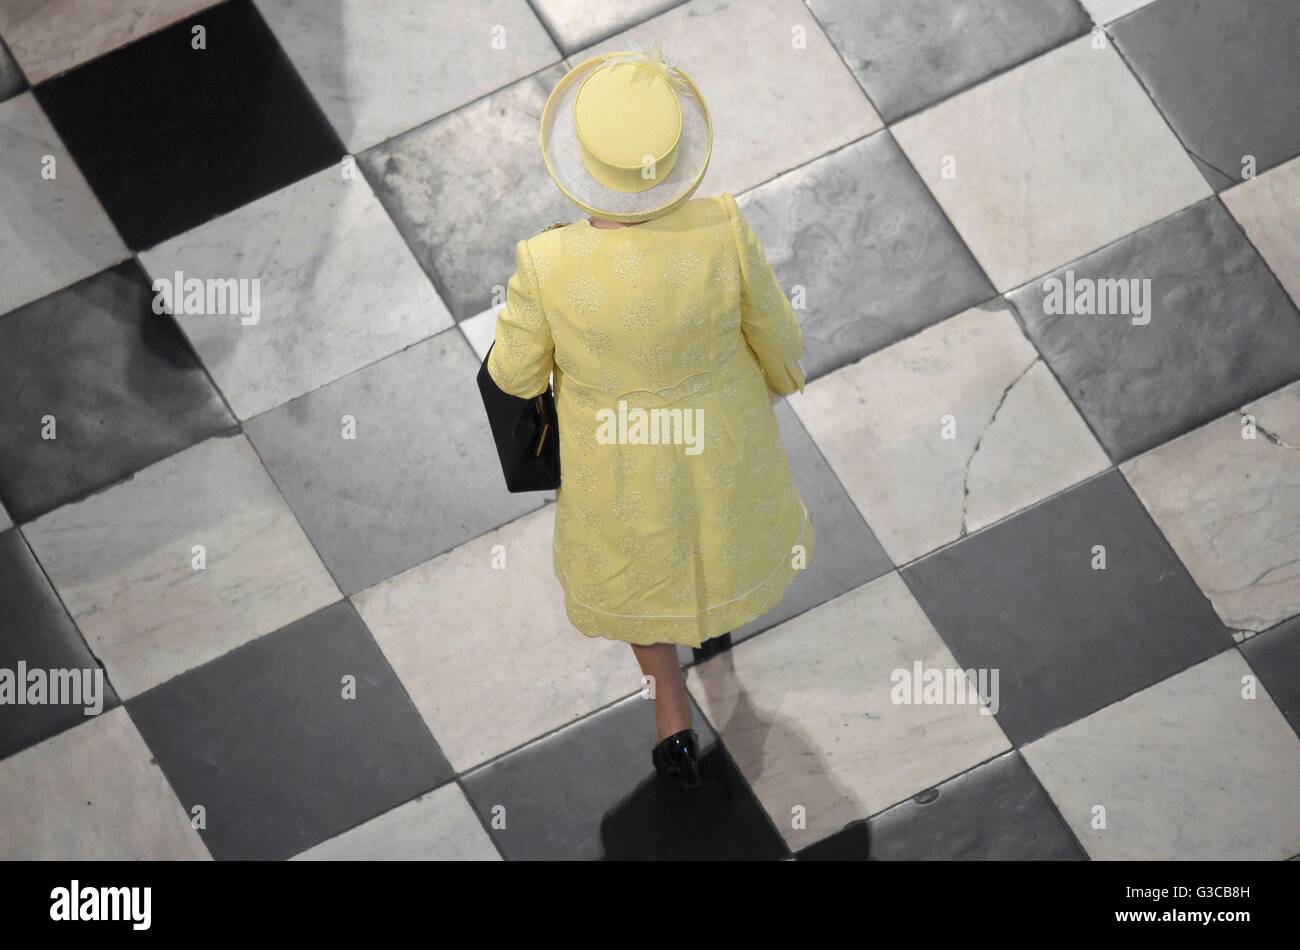 Queen Elizabeth II arrives at St Paul's Cathedral in London for a national service of thanksgiving to celebrate her 90th birthday. Stock Photo